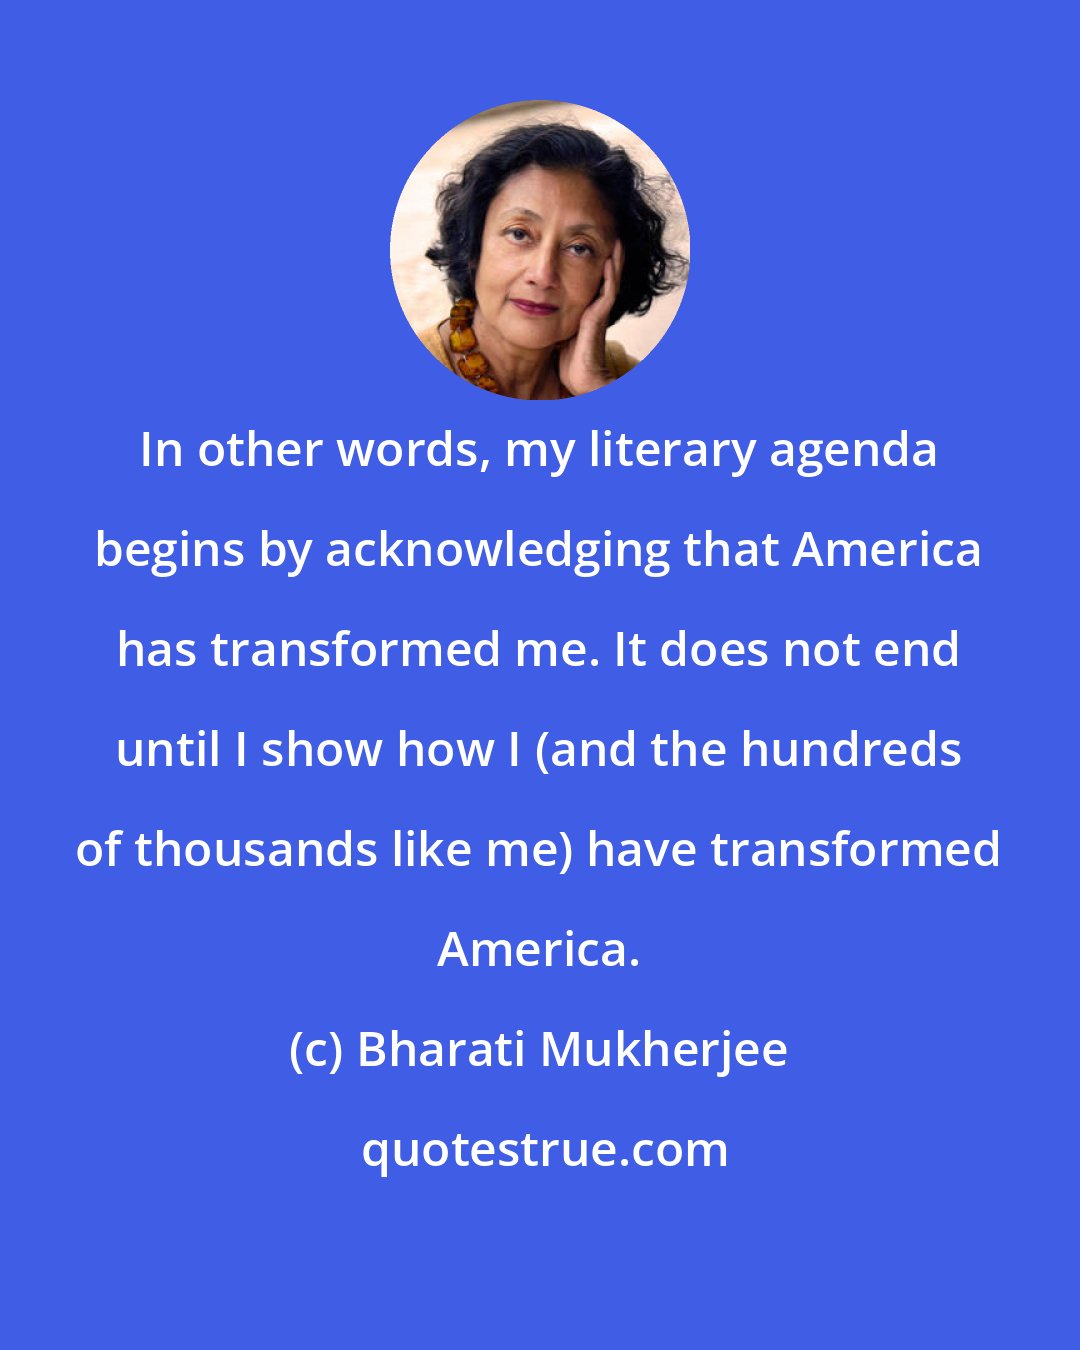 Bharati Mukherjee: In other words, my literary agenda begins by acknowledging that America has transformed me. It does not end until I show how I (and the hundreds of thousands like me) have transformed America.